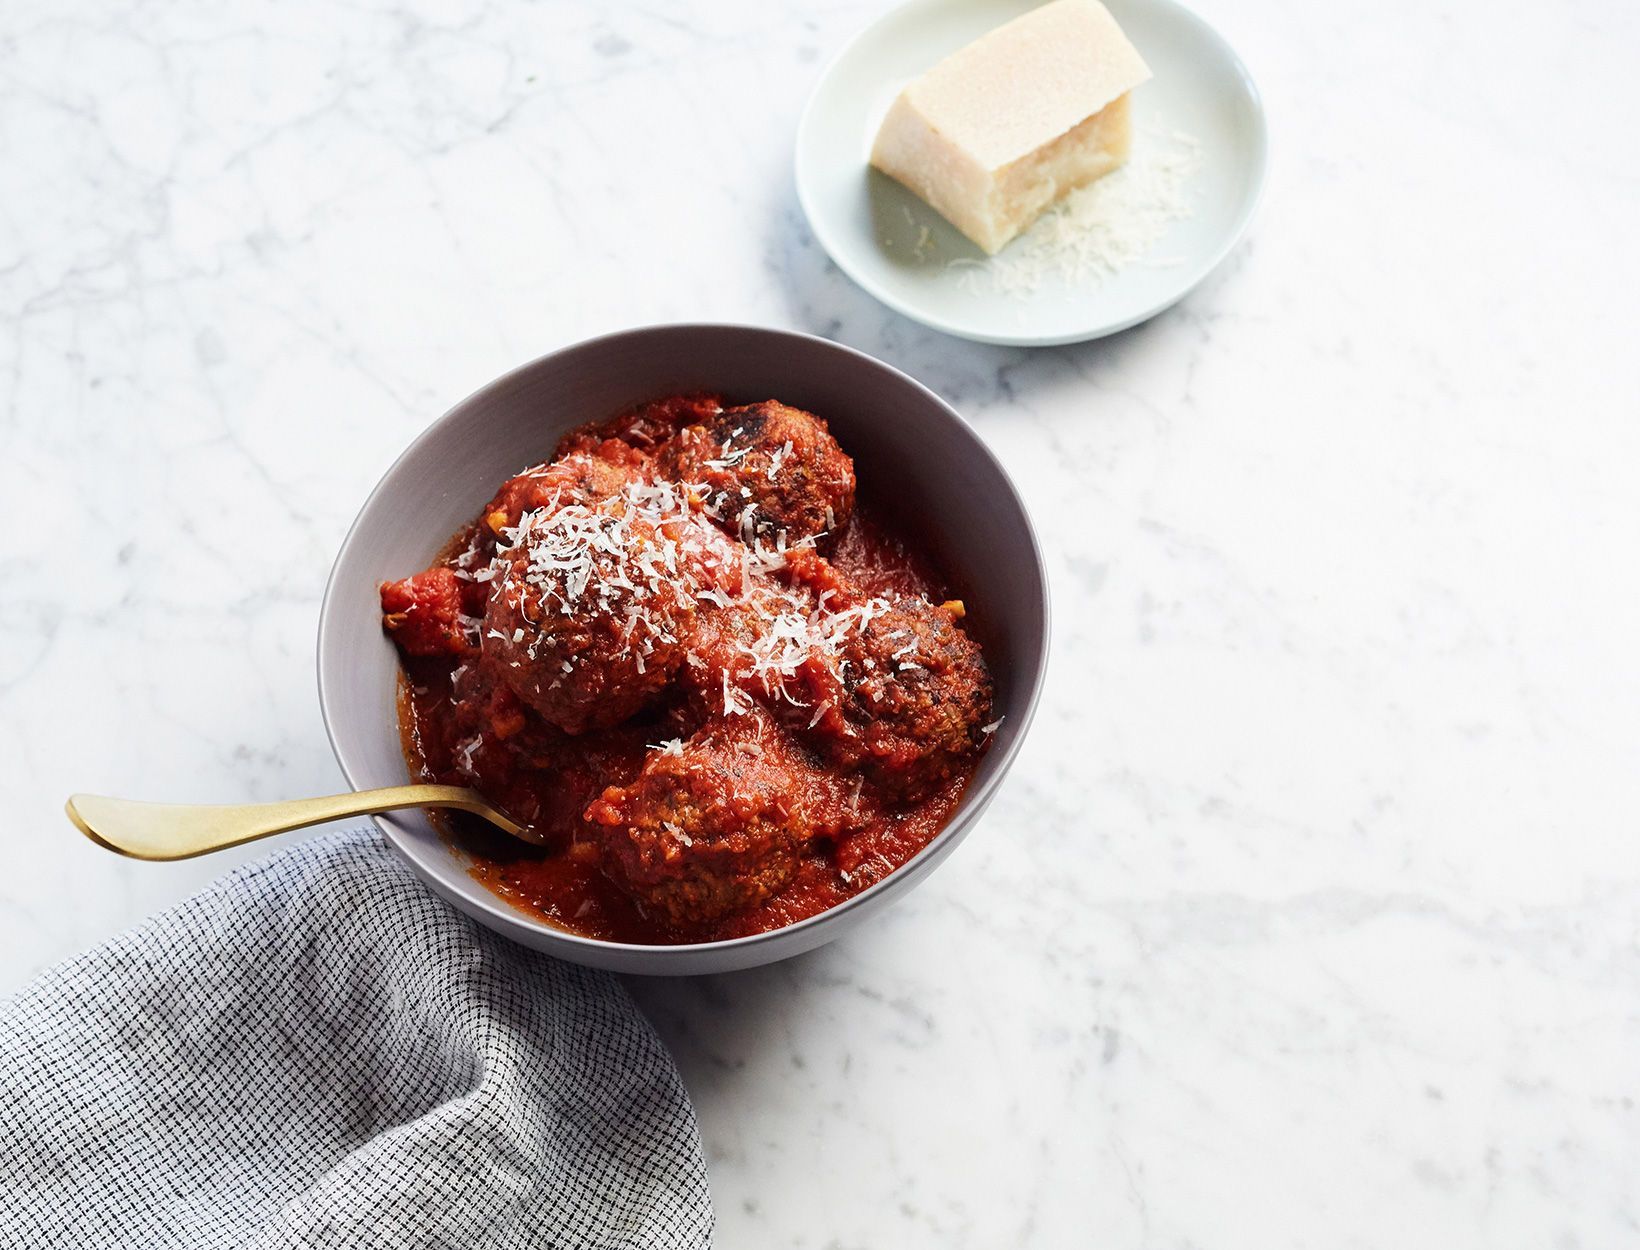 Veggie meatballs can be kind of a bummer but these ones, loaded with roasted veggies and lots of parm, are insanely good. You can